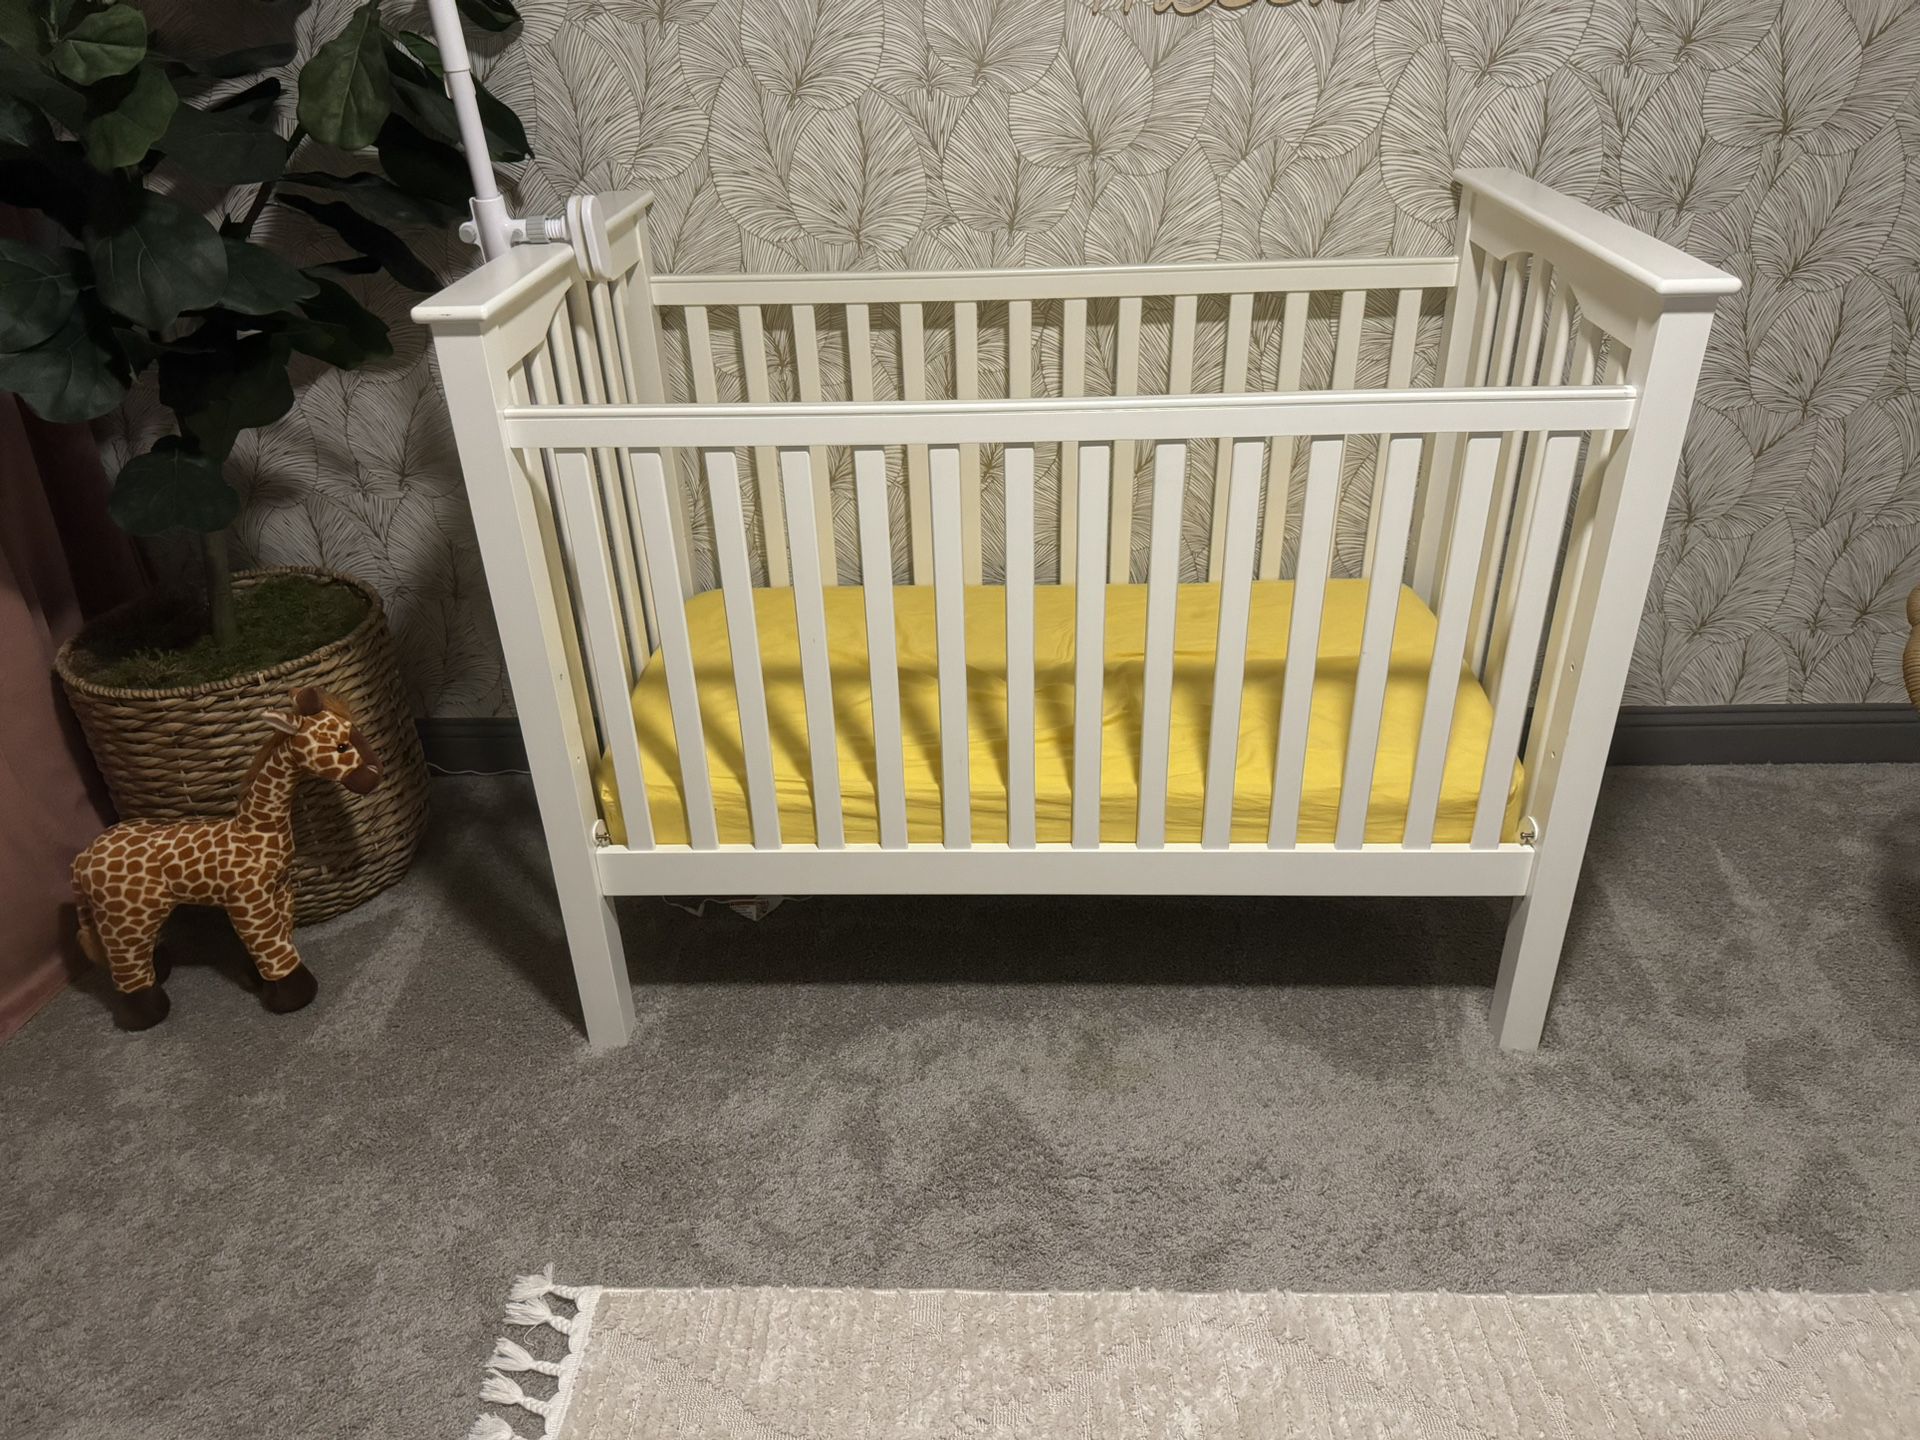 Pottery Barn White Crib With Serta Mattress - $250 Or Best Offer 